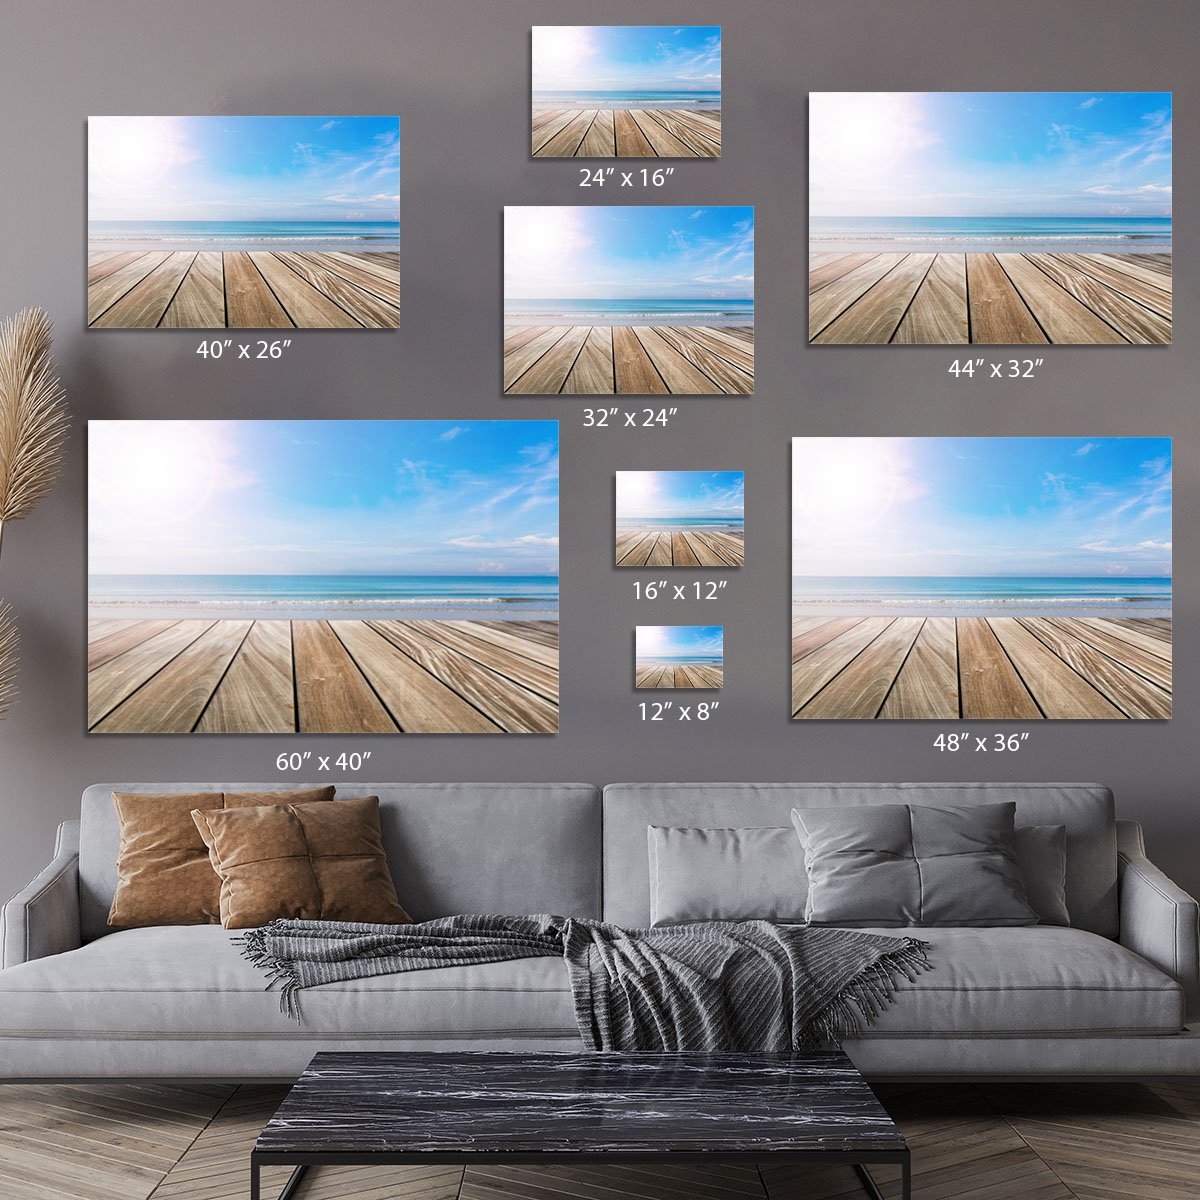 wood terrace on the beach and sun Canvas Print or Poster